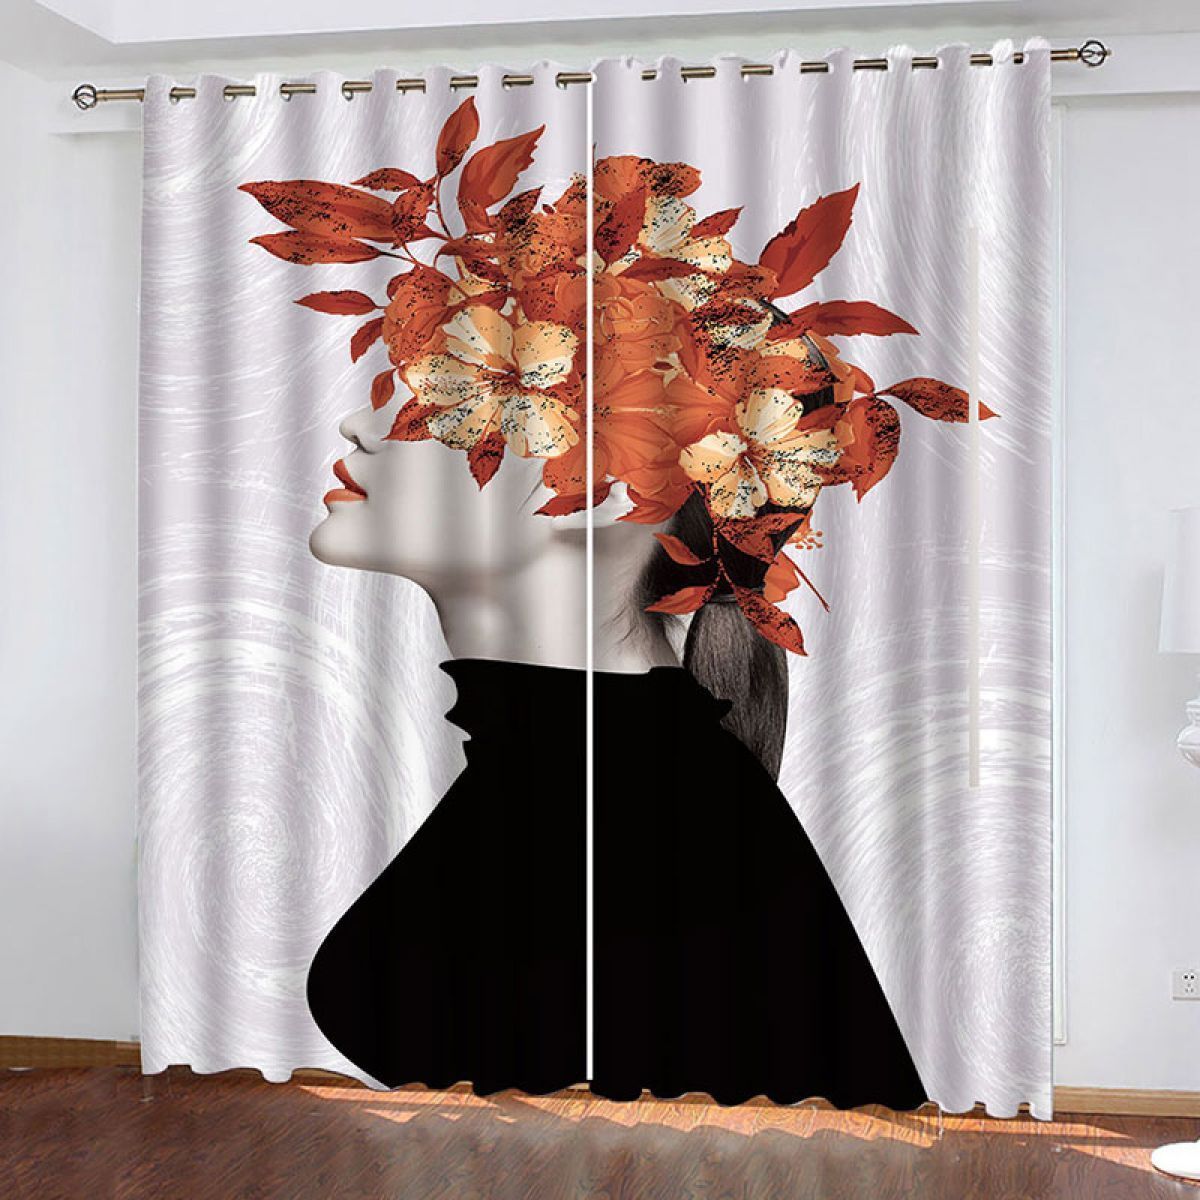 3d beauty with floral headdress printed window curtain home decor 1300